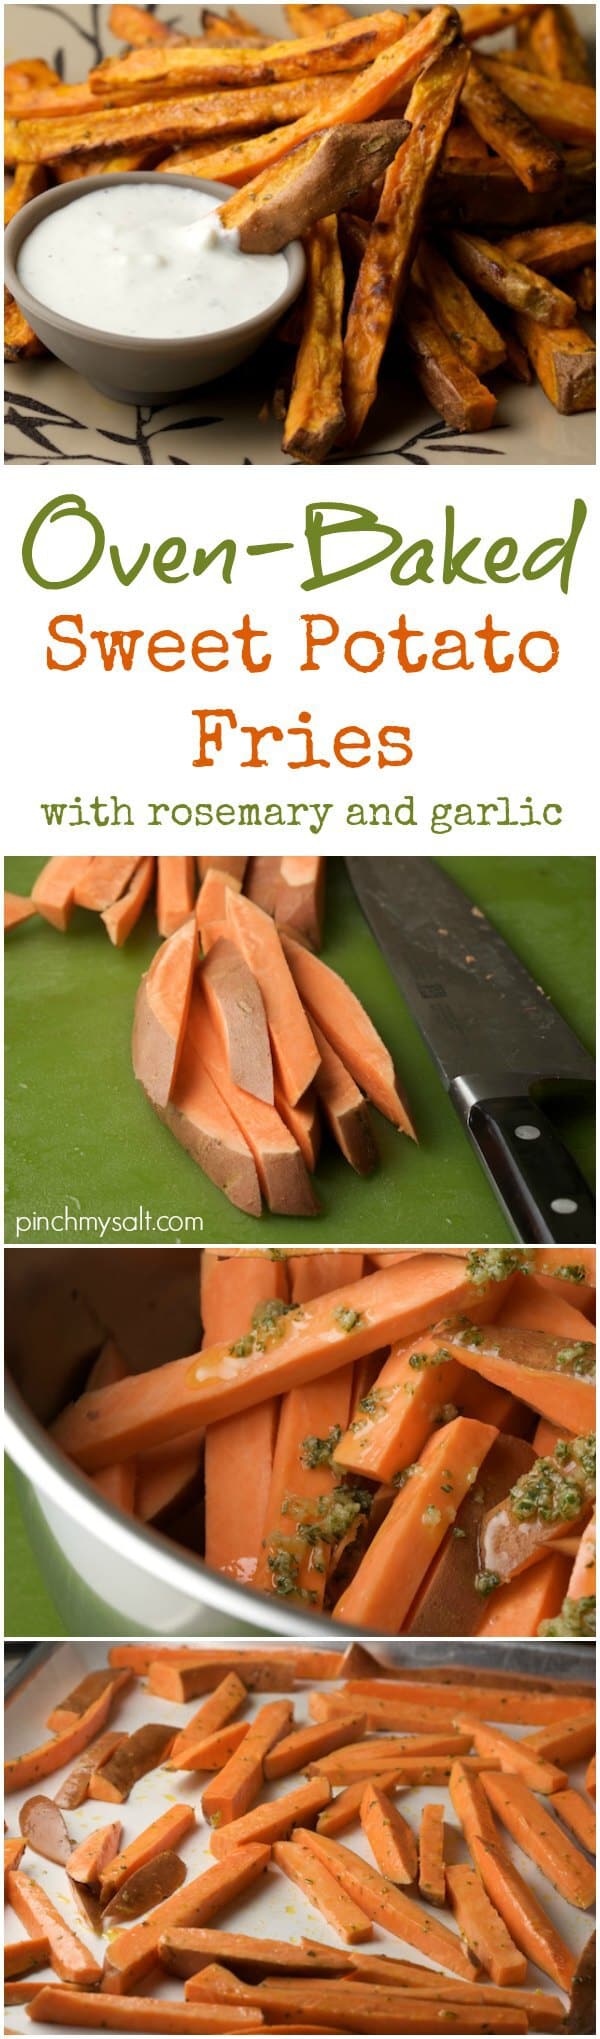 Oven-Baked Sweet Potato Fries with Garlic and Rosemary | pinchmysalt.com